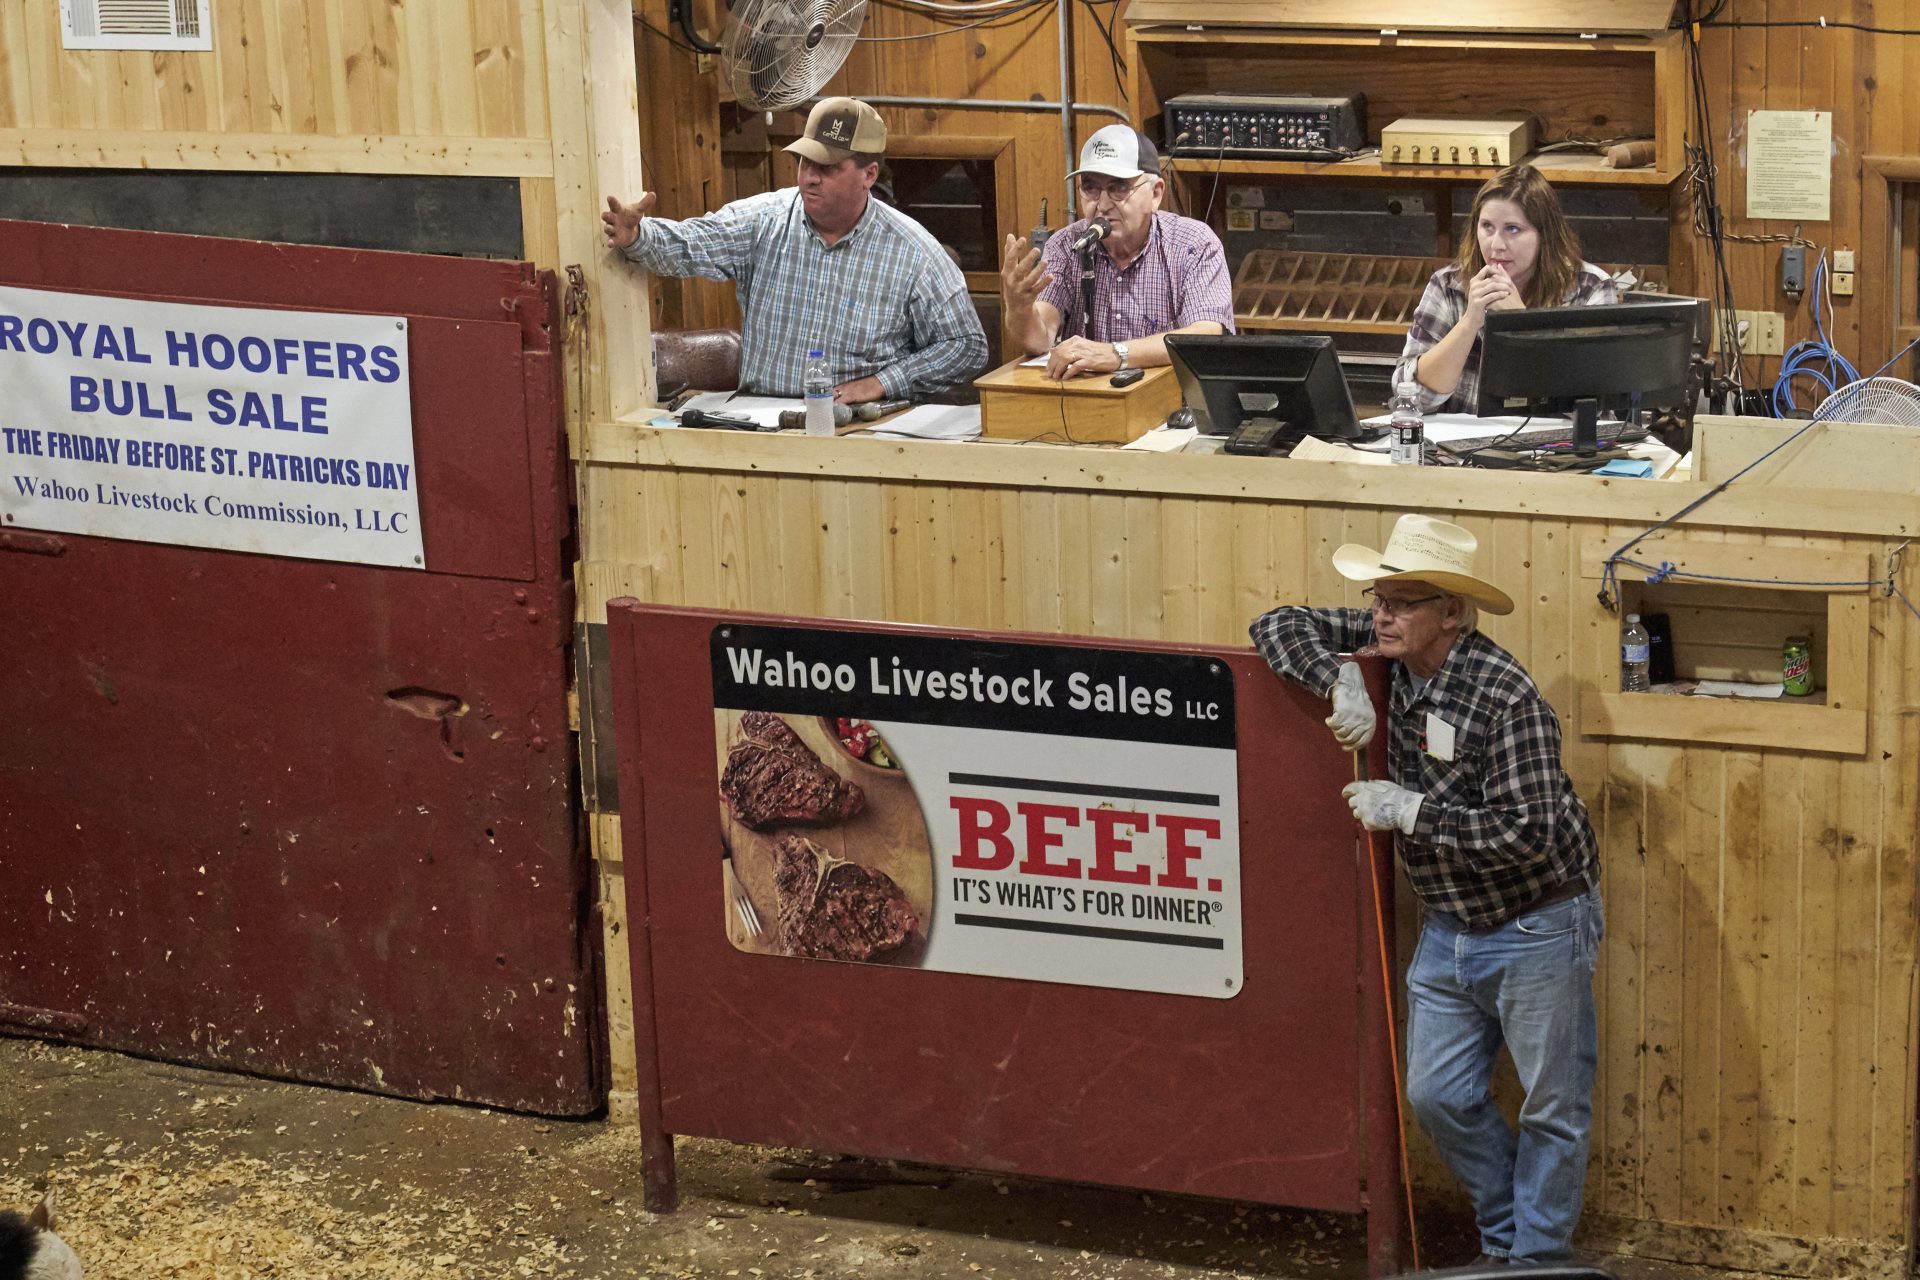 Auctioneers take bids at the Wahoo Livestock Sales cattle auction in Wahoo, Neb., Friday, Sept. 18, 2020.